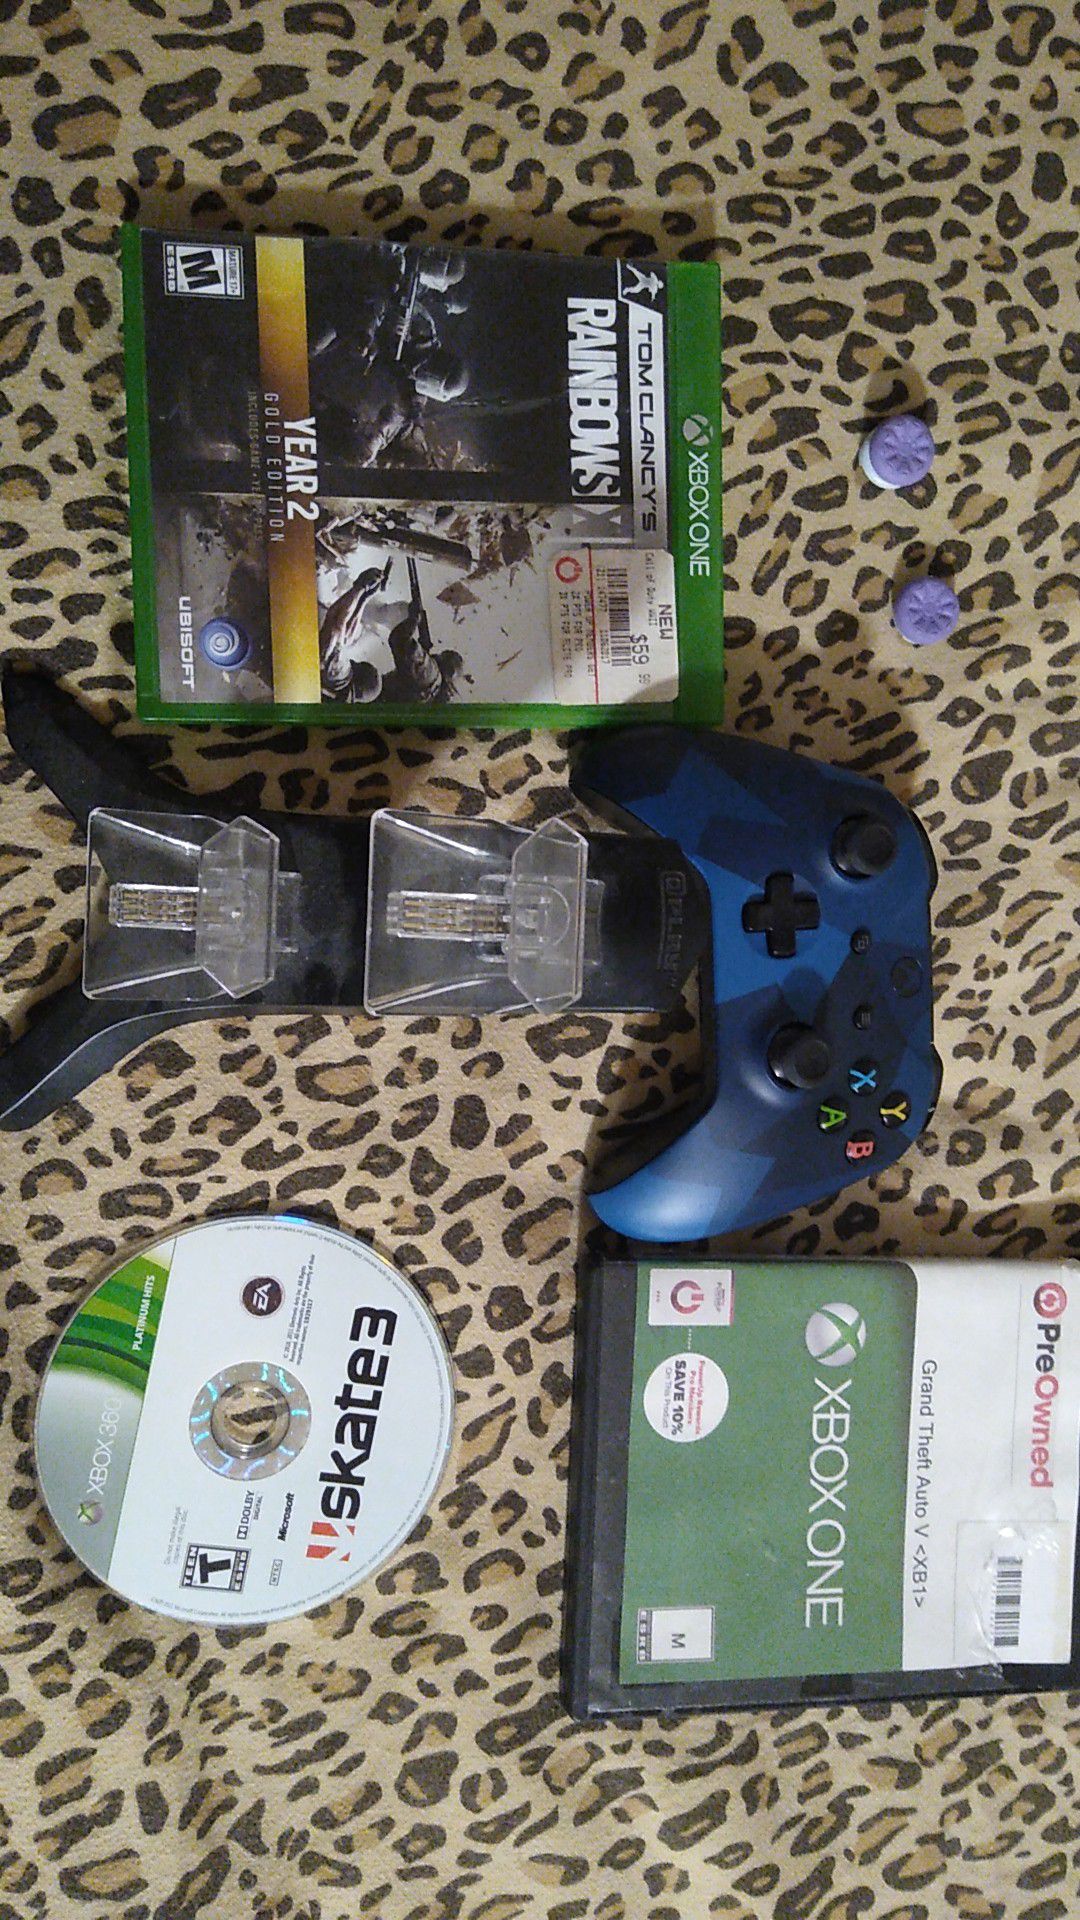 Xbox one controller and games